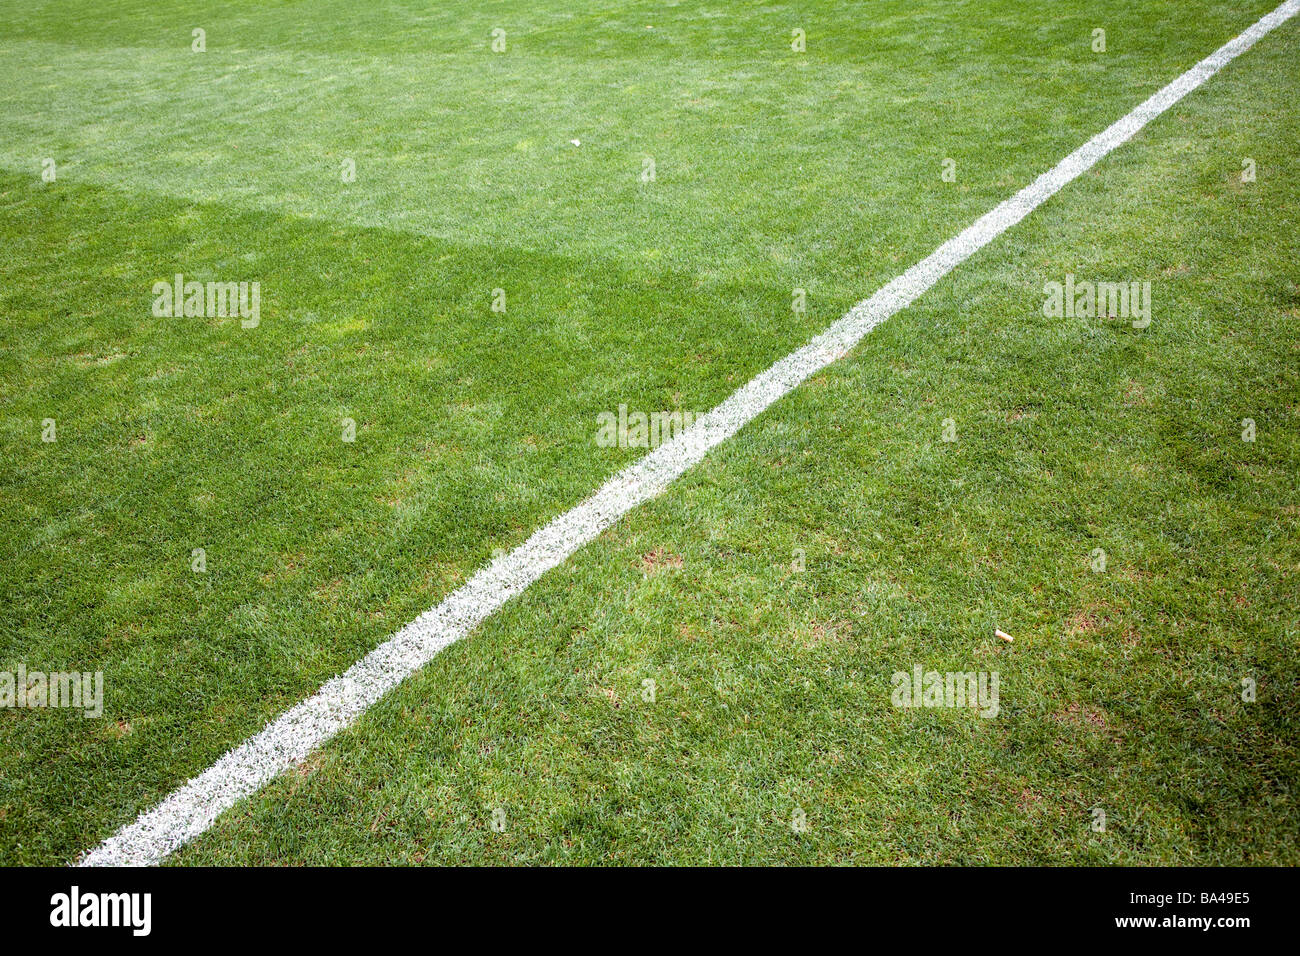 Sideline of a football field Stock Photo